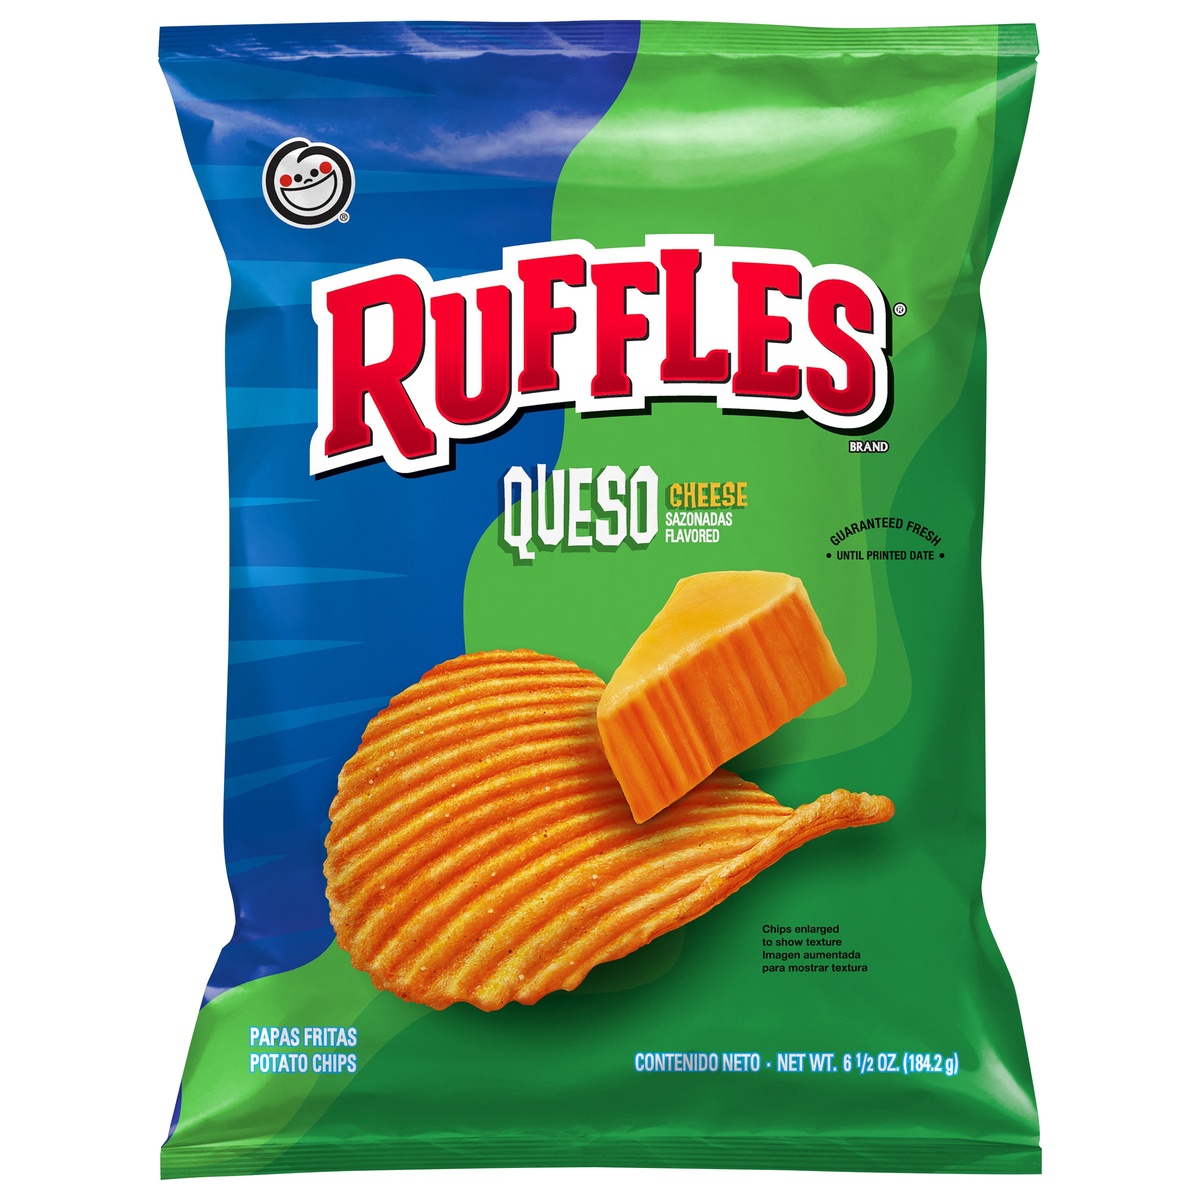 slide 6 of 6, Ruffles Queso Cheese Flavored Potato Chips 6.5 oz, 6.5 oz